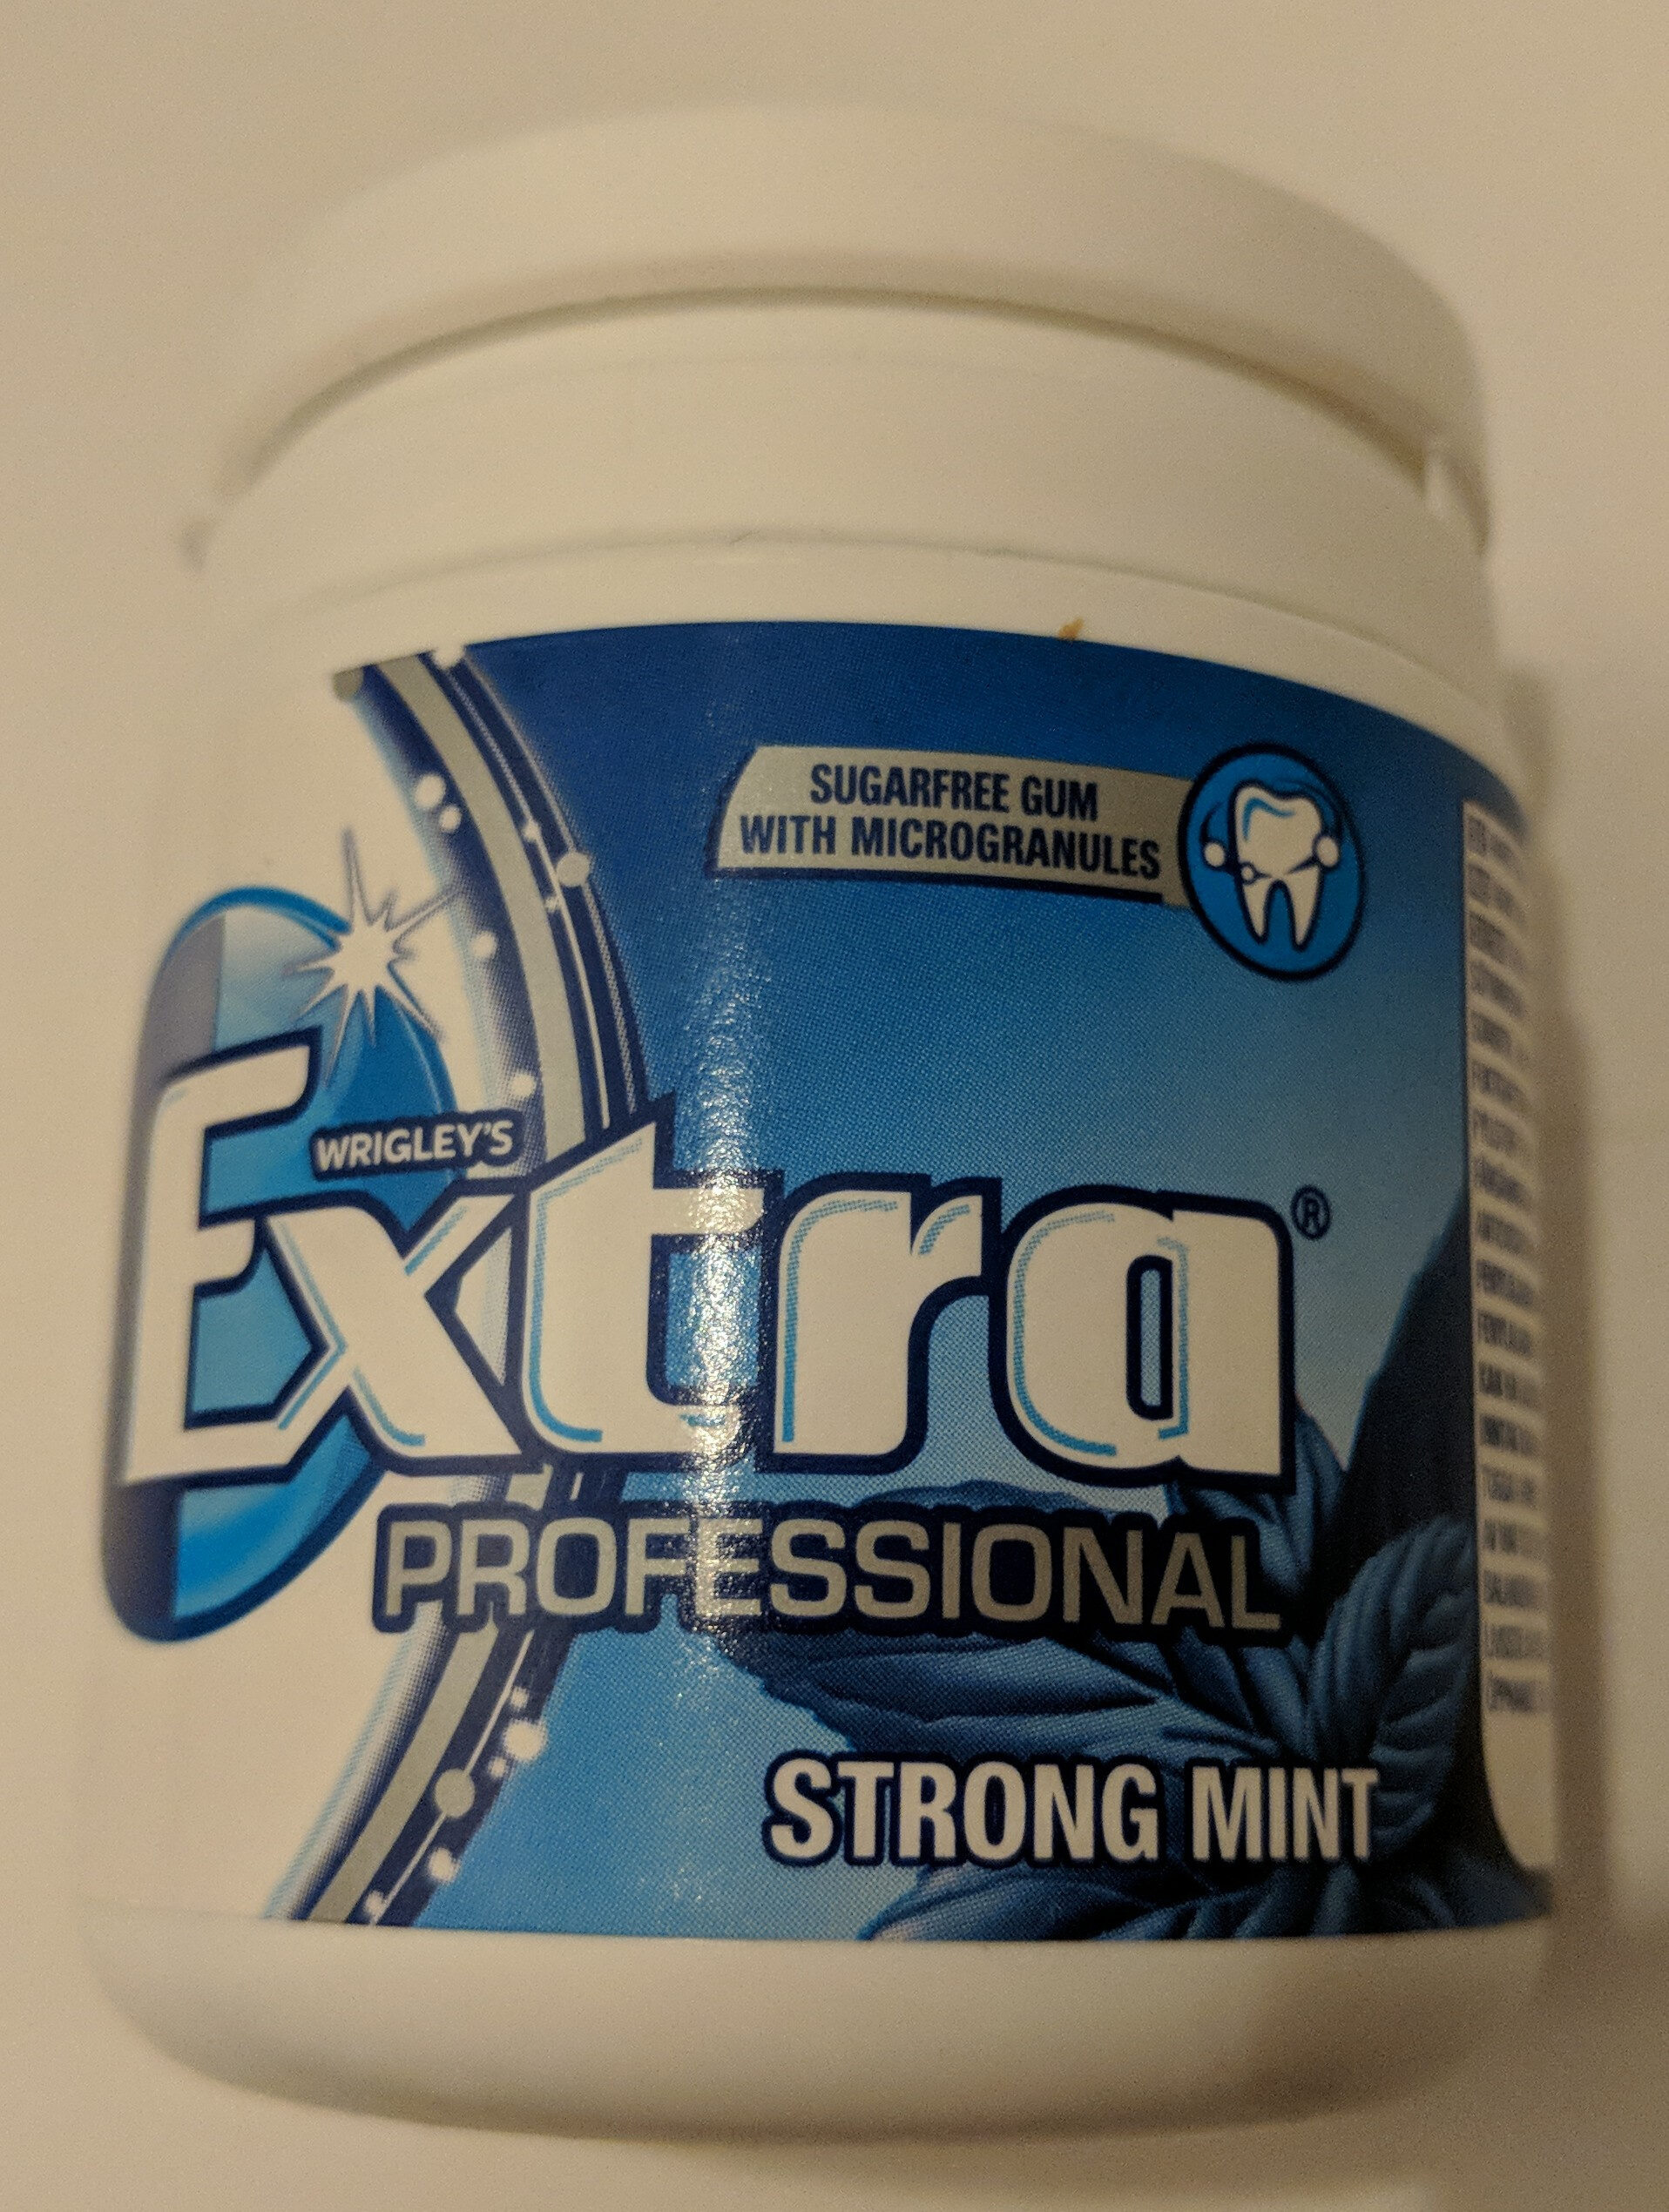 Extra Professional Strong Mint - Produkt